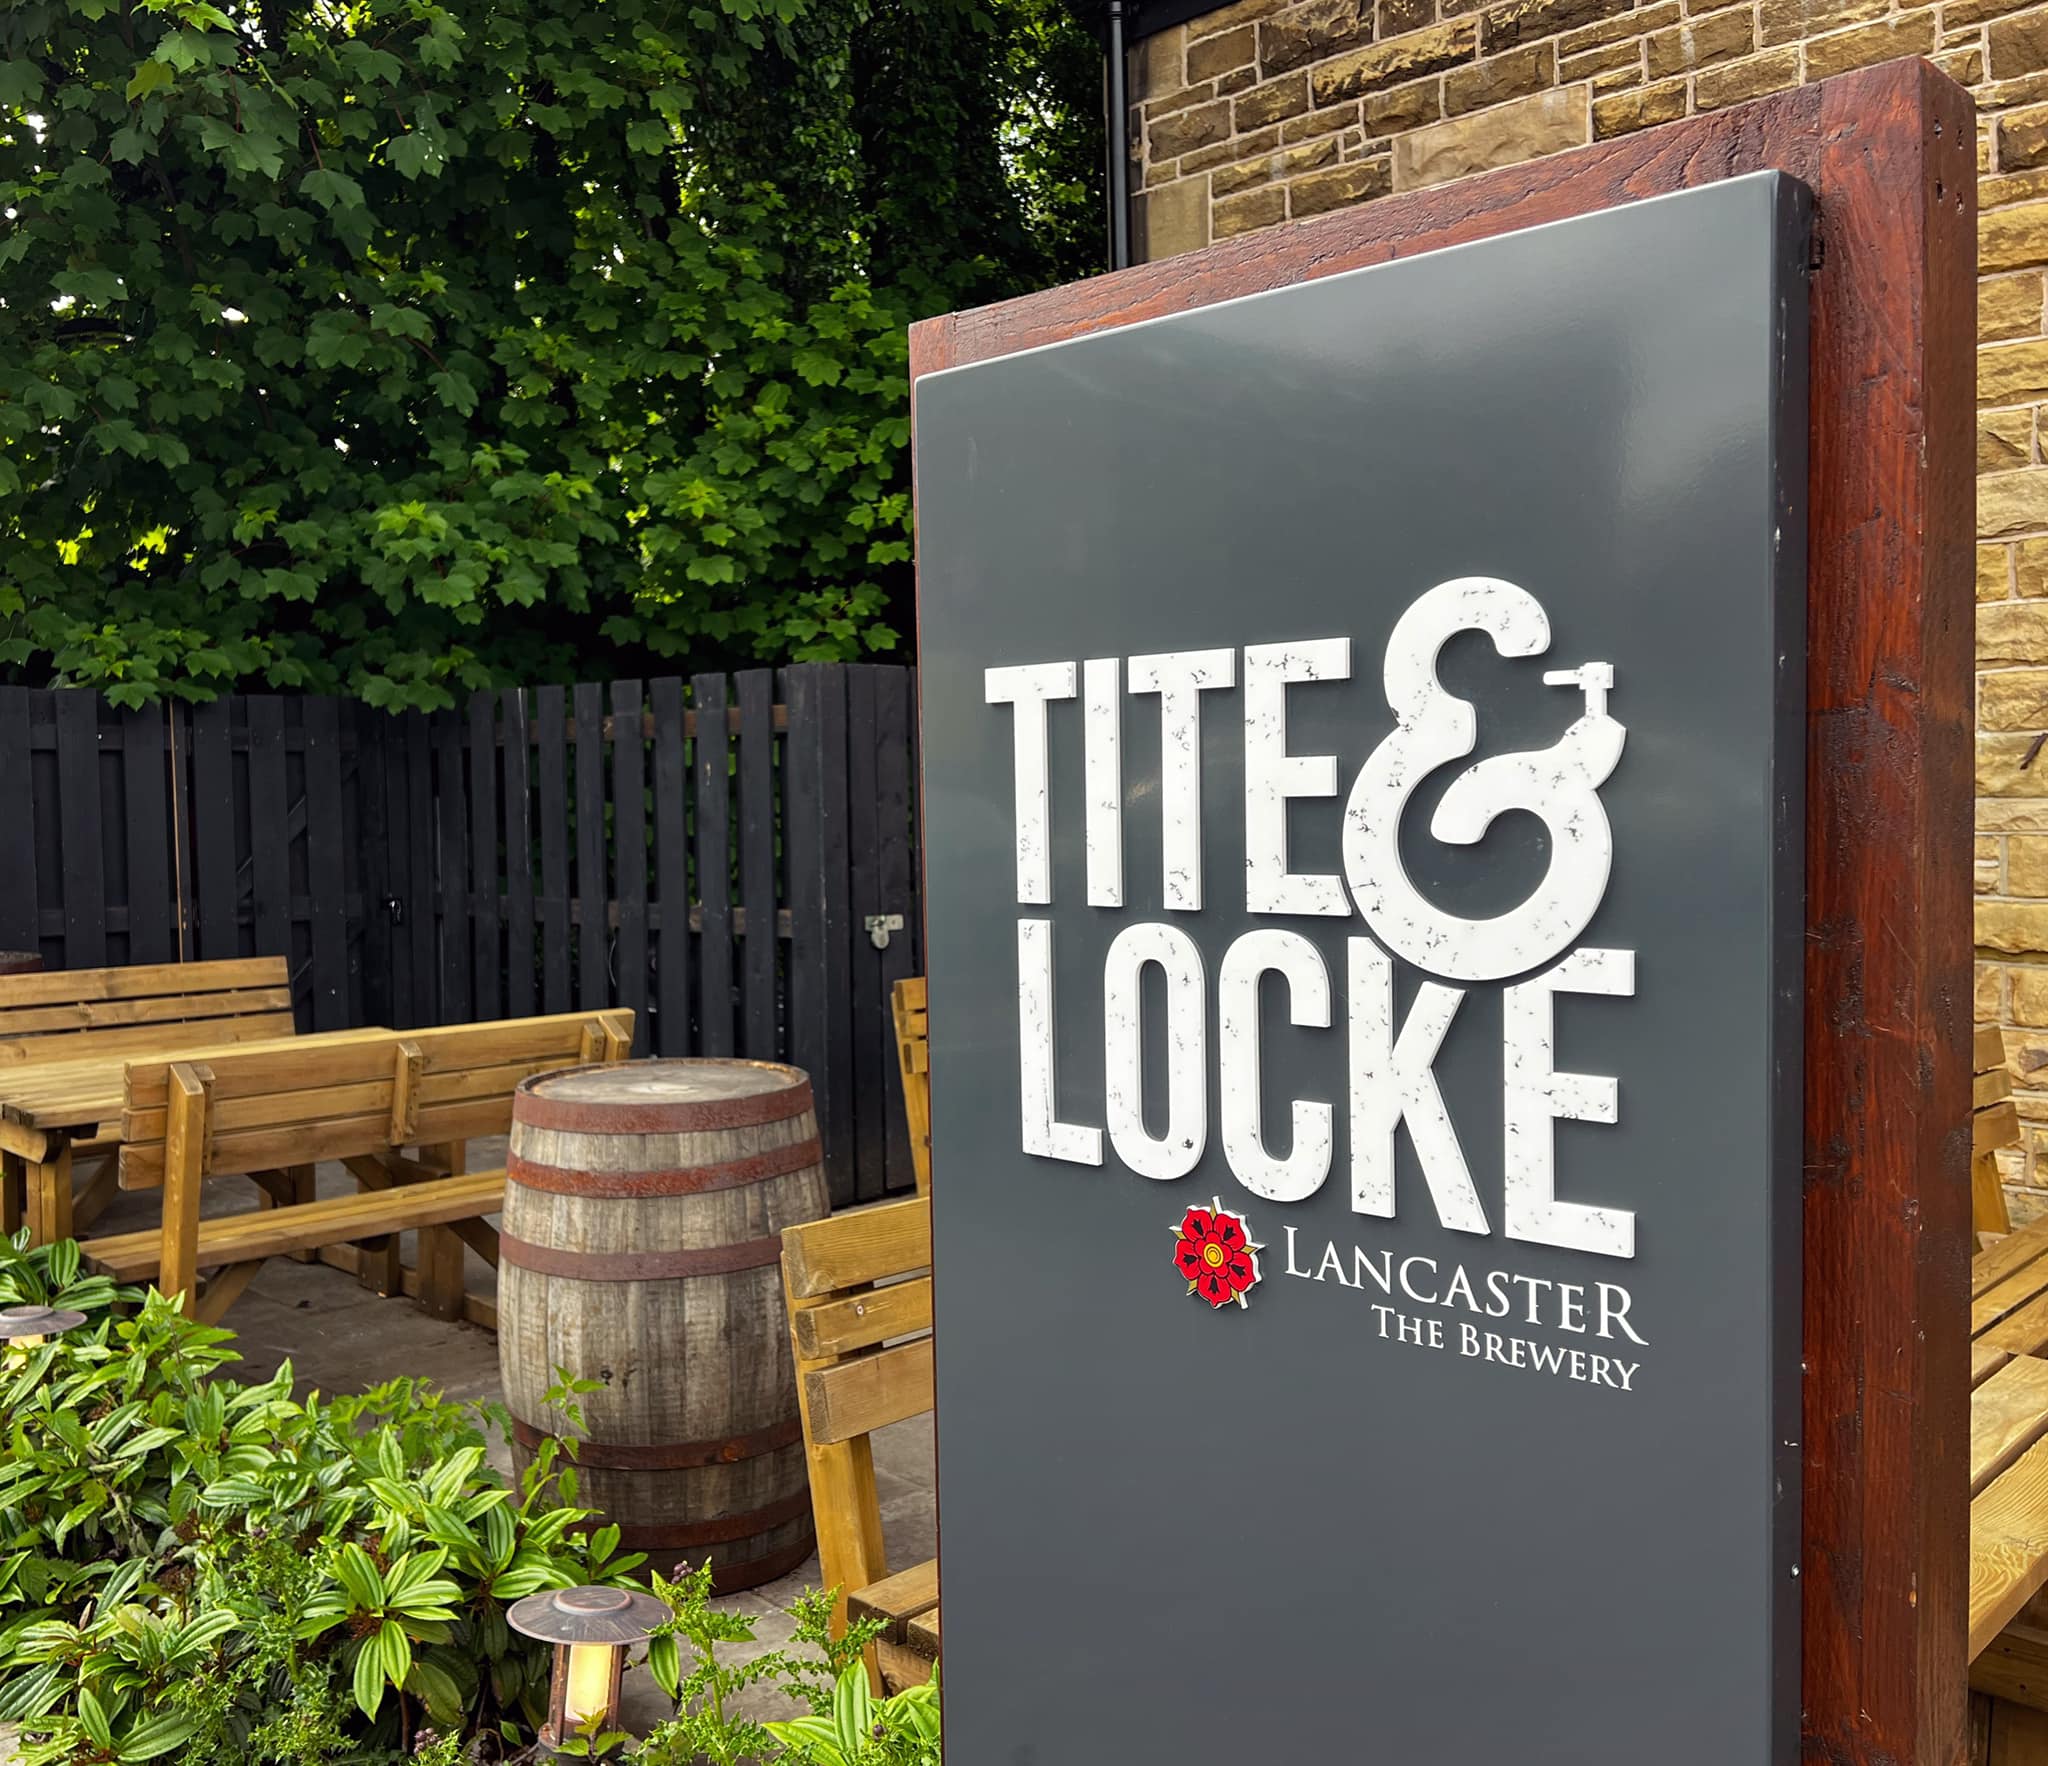 New brand and website for Tite and Locke pub at Lancaster Railway Station